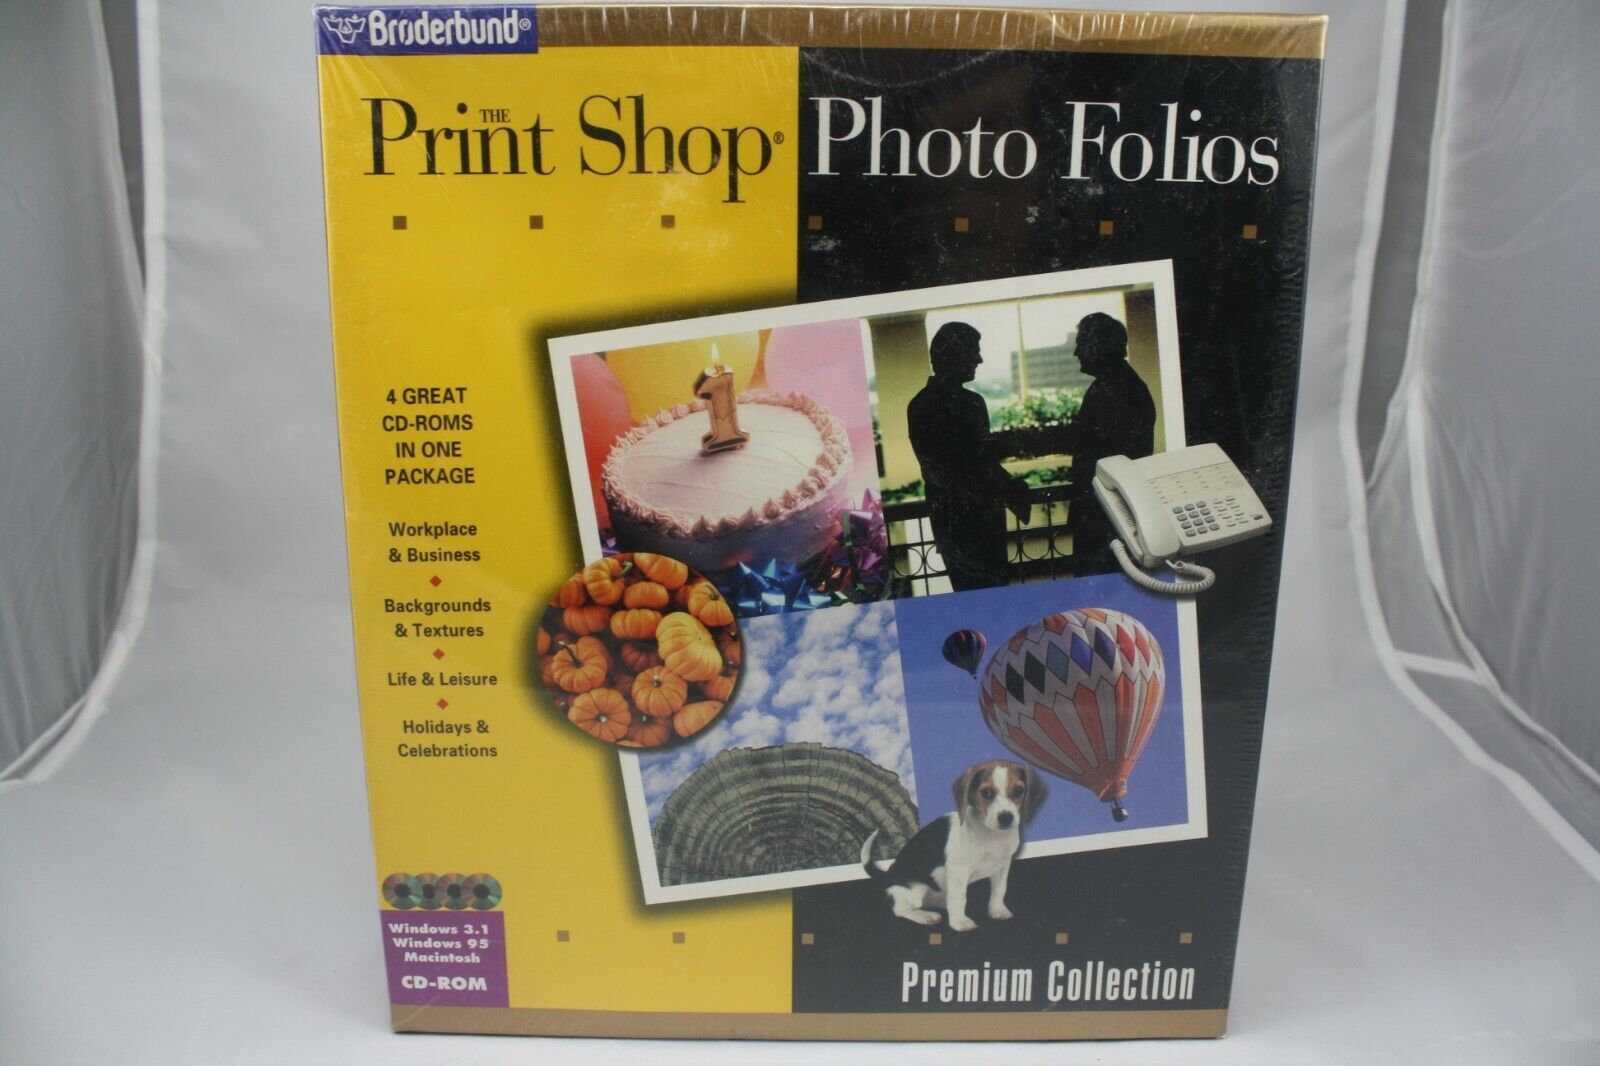 The Print Shop Photo Folios Premium Collection For PC By Broderbund. New